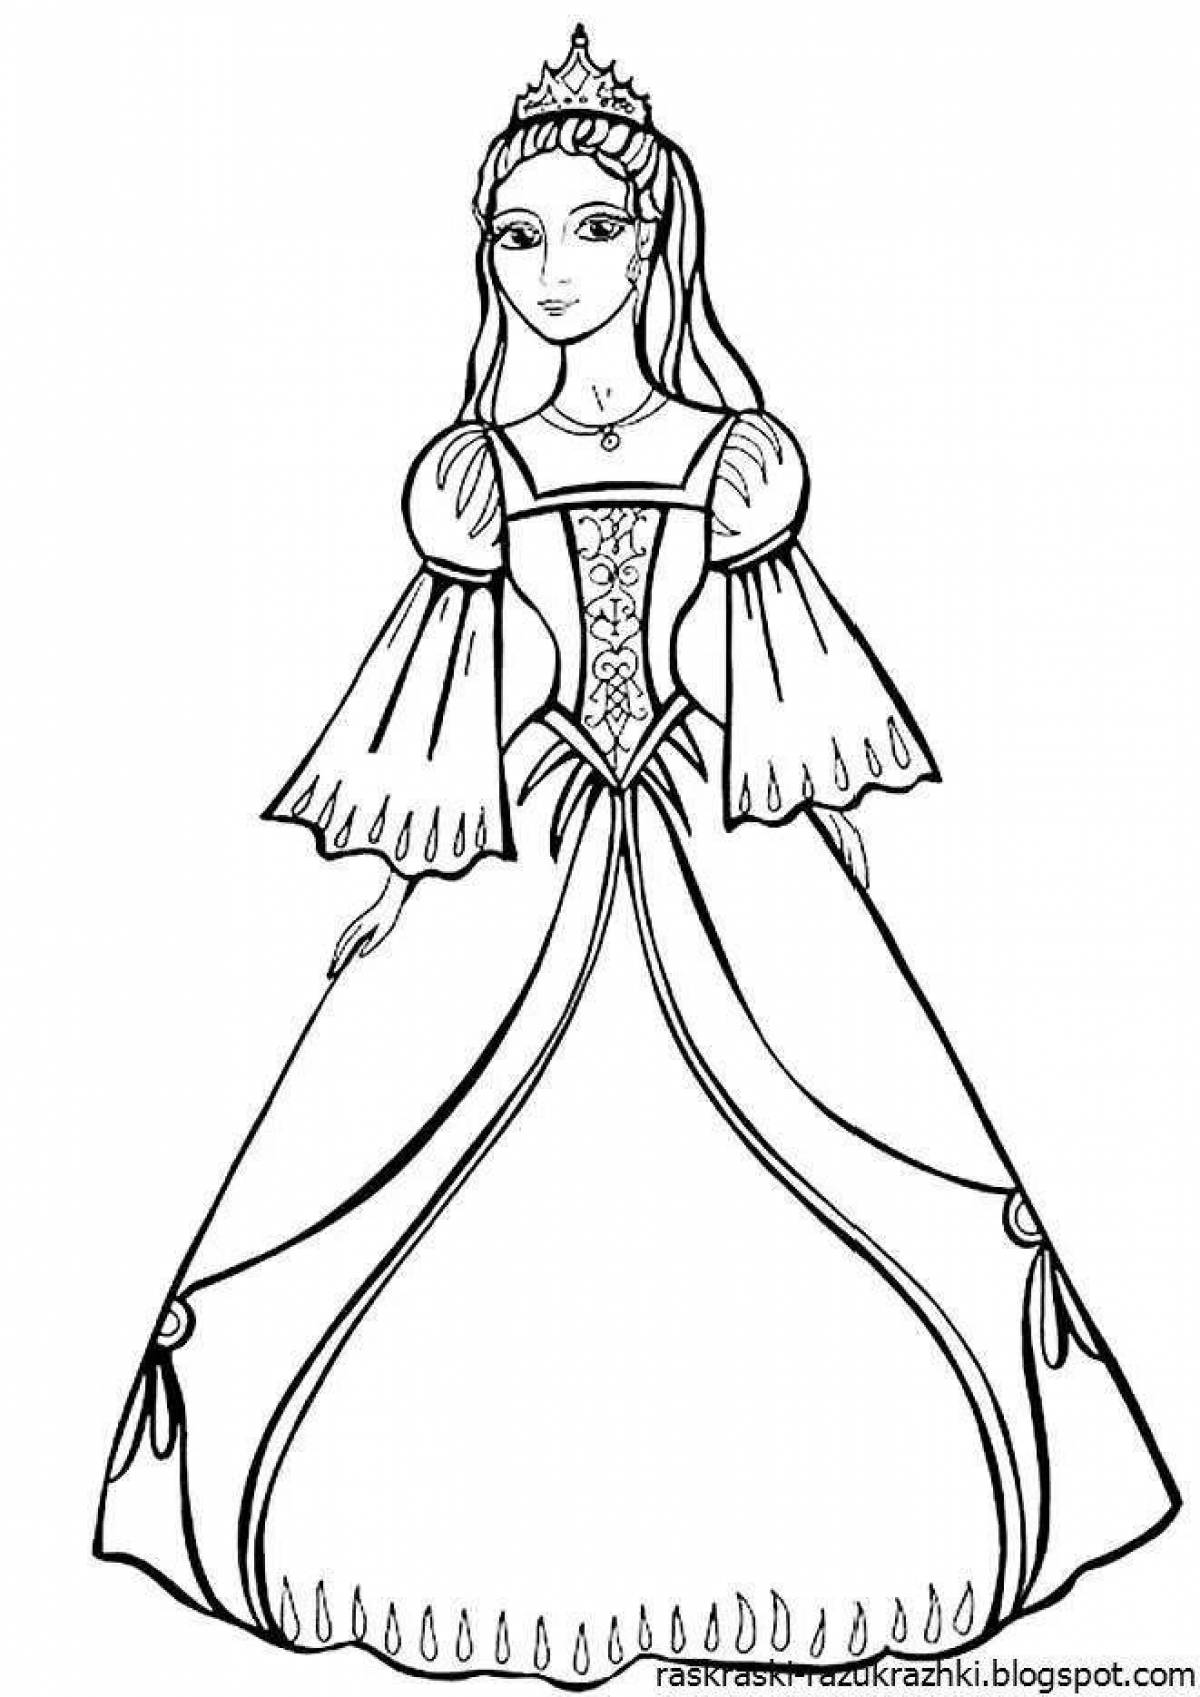 Royal queen coloring page for kids